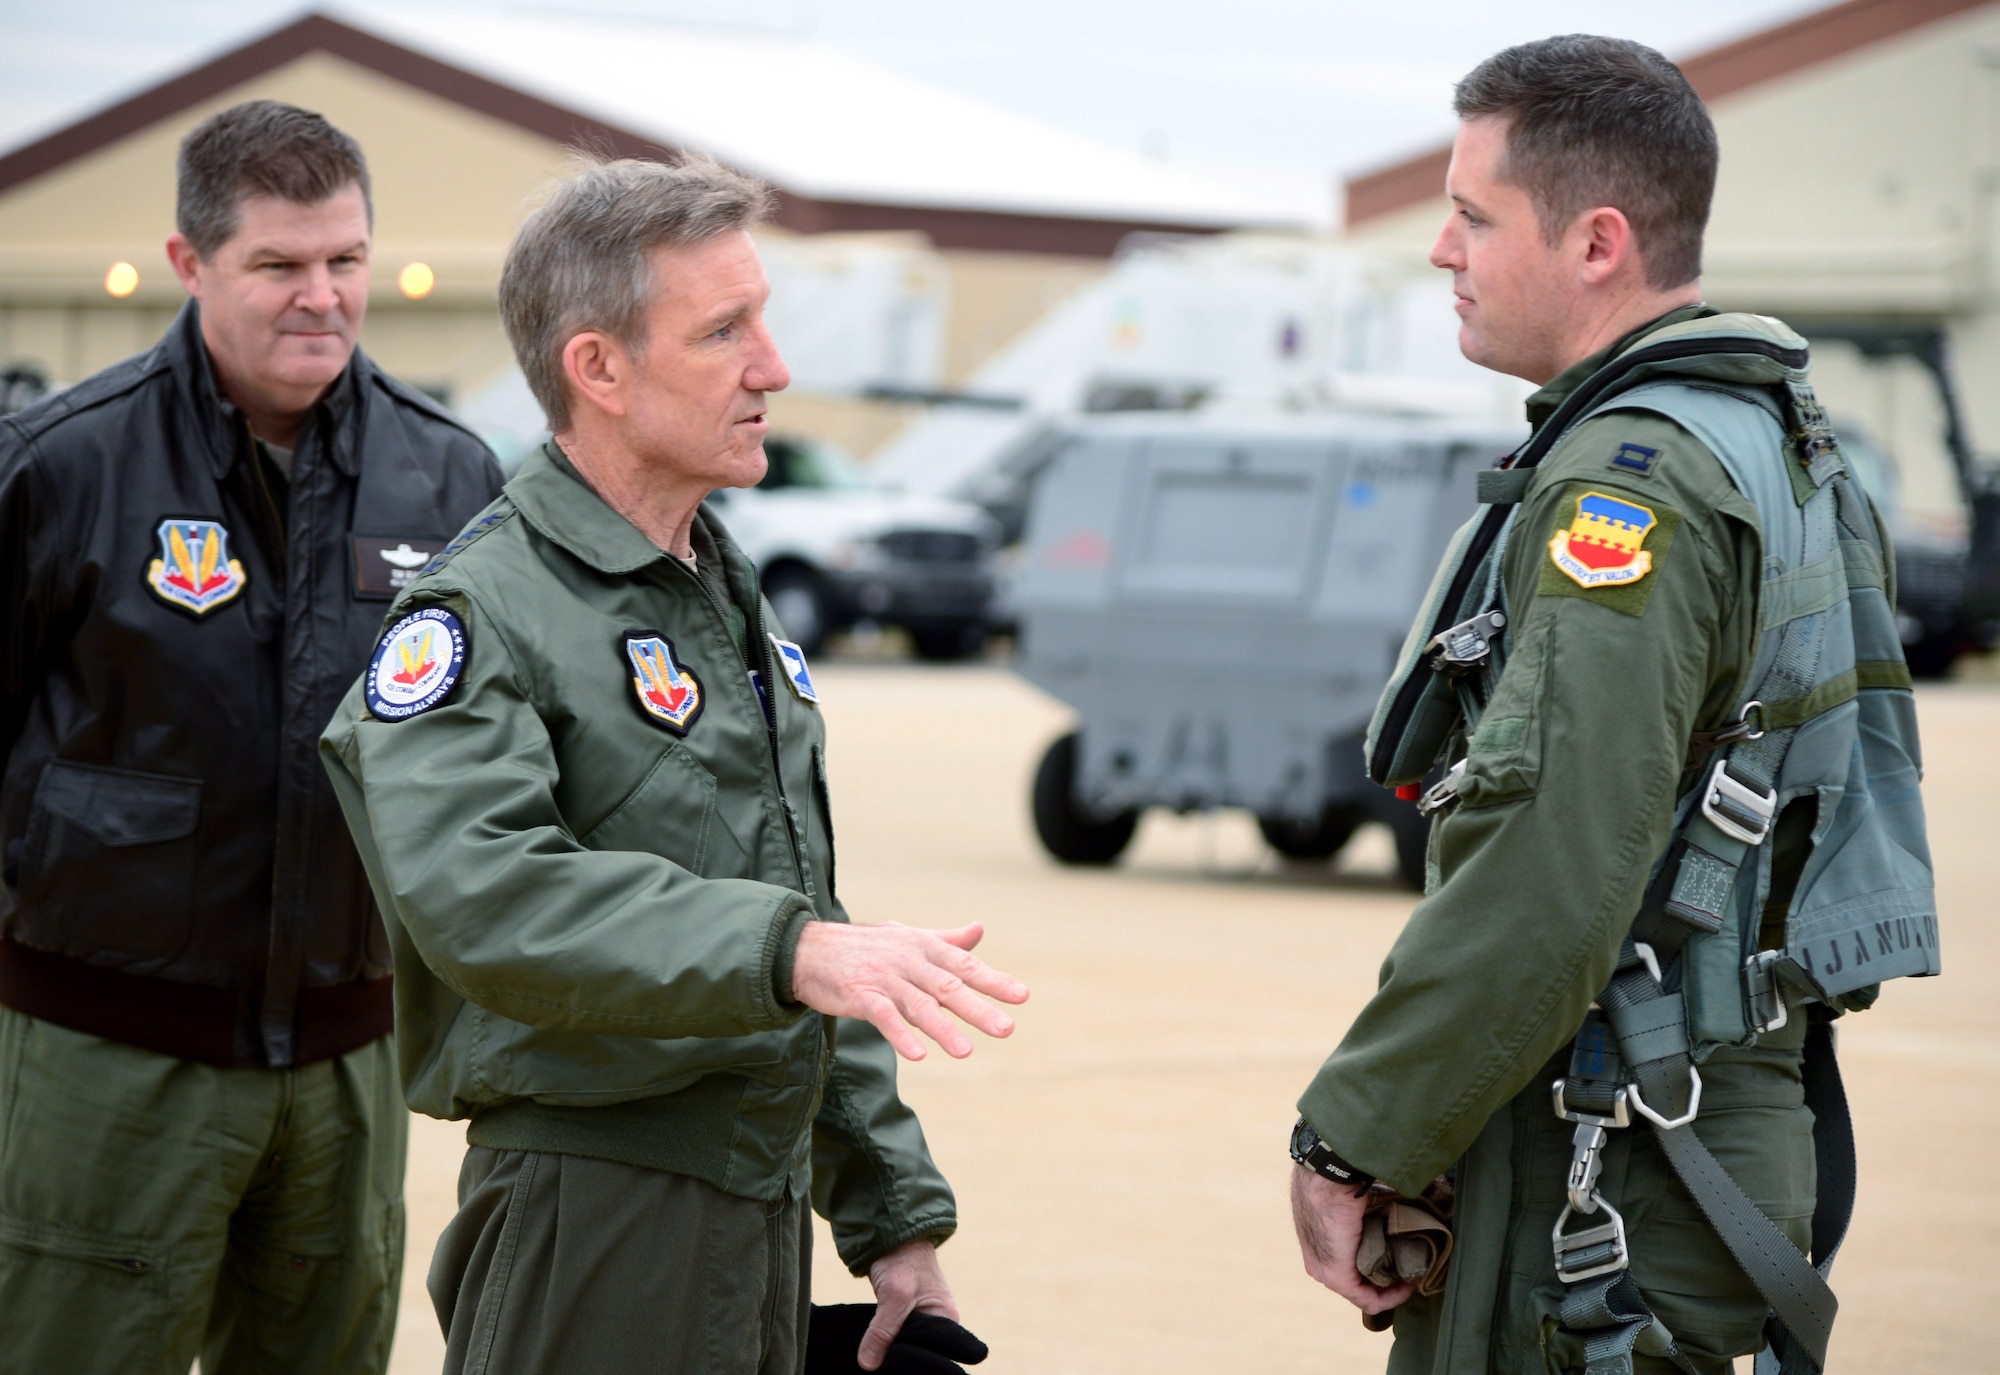 Gen. Hawk Carlisle (center), commander of Air Combat Command, and Maj. Gen. Thomas Deale, ACC A3, congratulate Capt. John "Rain" Waters, on certifying as the pilot for the 2017-18 F-16 Viper demonstration team Feb. 1, 2017 at Langley Air Force Base, Va. Demonstration pilots, who perform at air shows worldwide, serve two-year tours on their respective teams, and must be certified at multiple levels. Carlisle, as COMACC, was Waters' final level of certification, and named him as a demo pilot immediatley after the flight. (U.S. Air Force photo by Emerald Ralston)